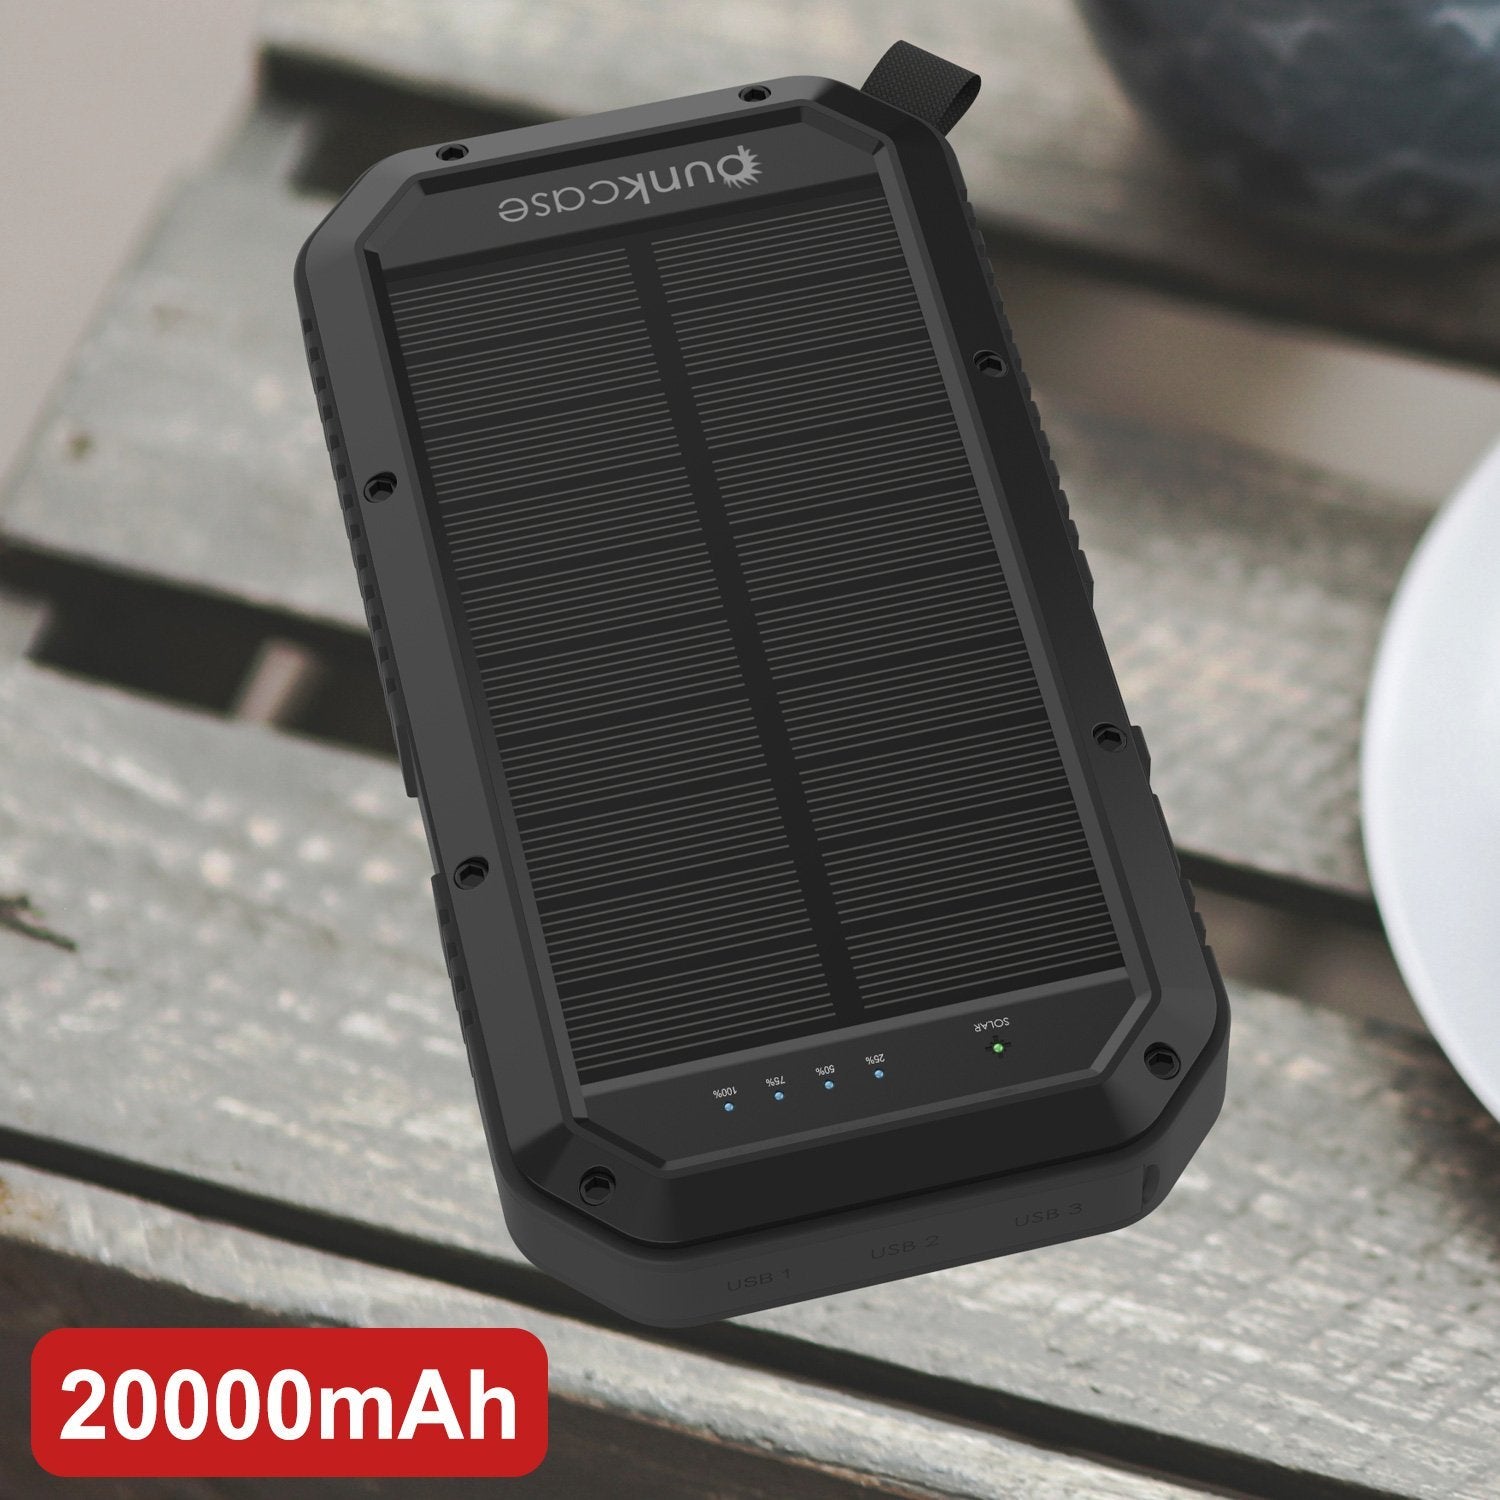 PunkCase Solar Wireless PowerBank 20000mah Battery Pack for iPhone X/XS/Max/XR / 11/10, iPad, Samsung Galaxy S10 / S9 and Many More [Black]